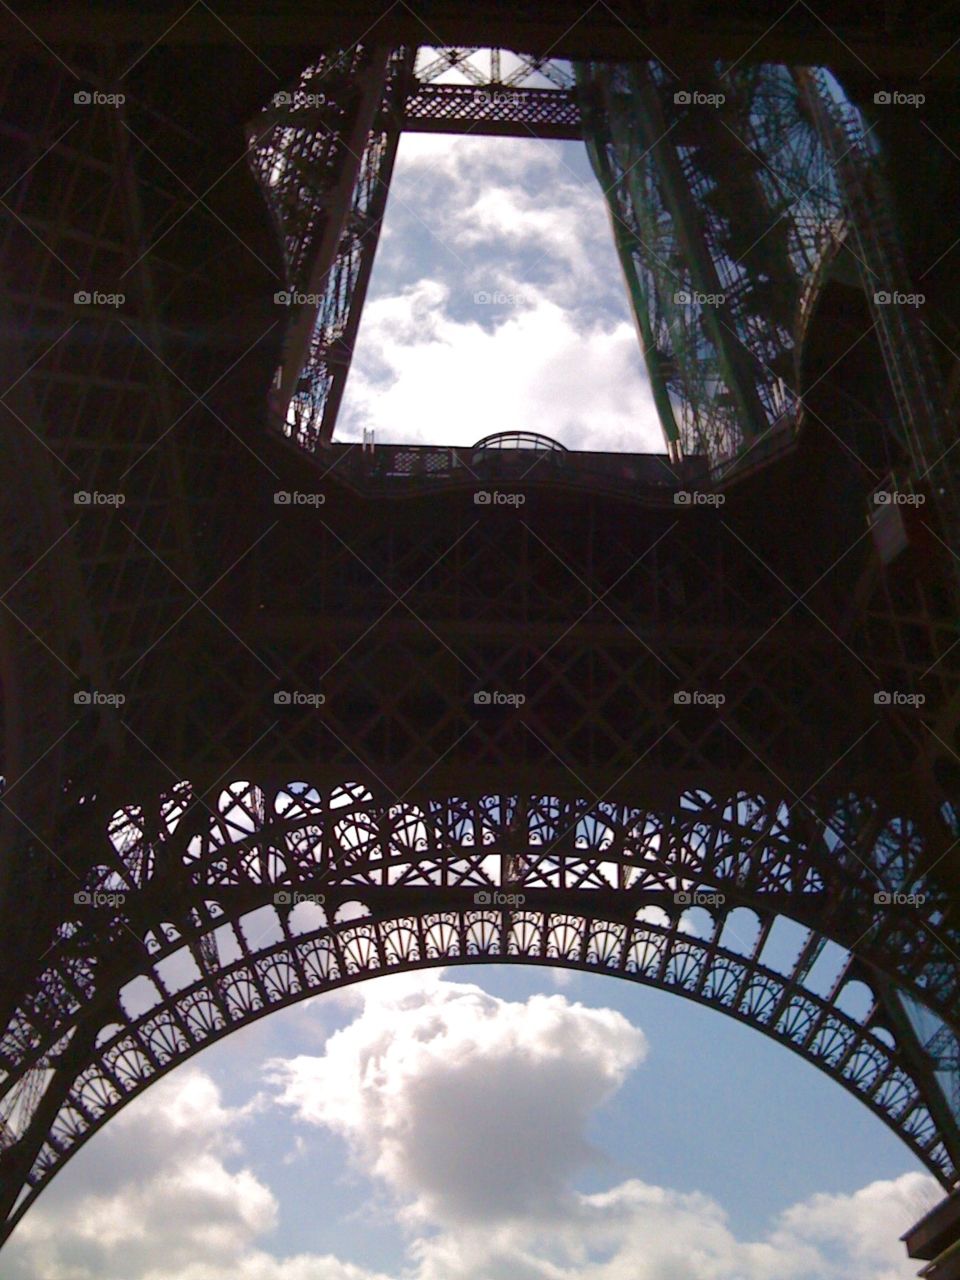 Inside the Eiffel . The arches of the Eiffel Tower taken from below